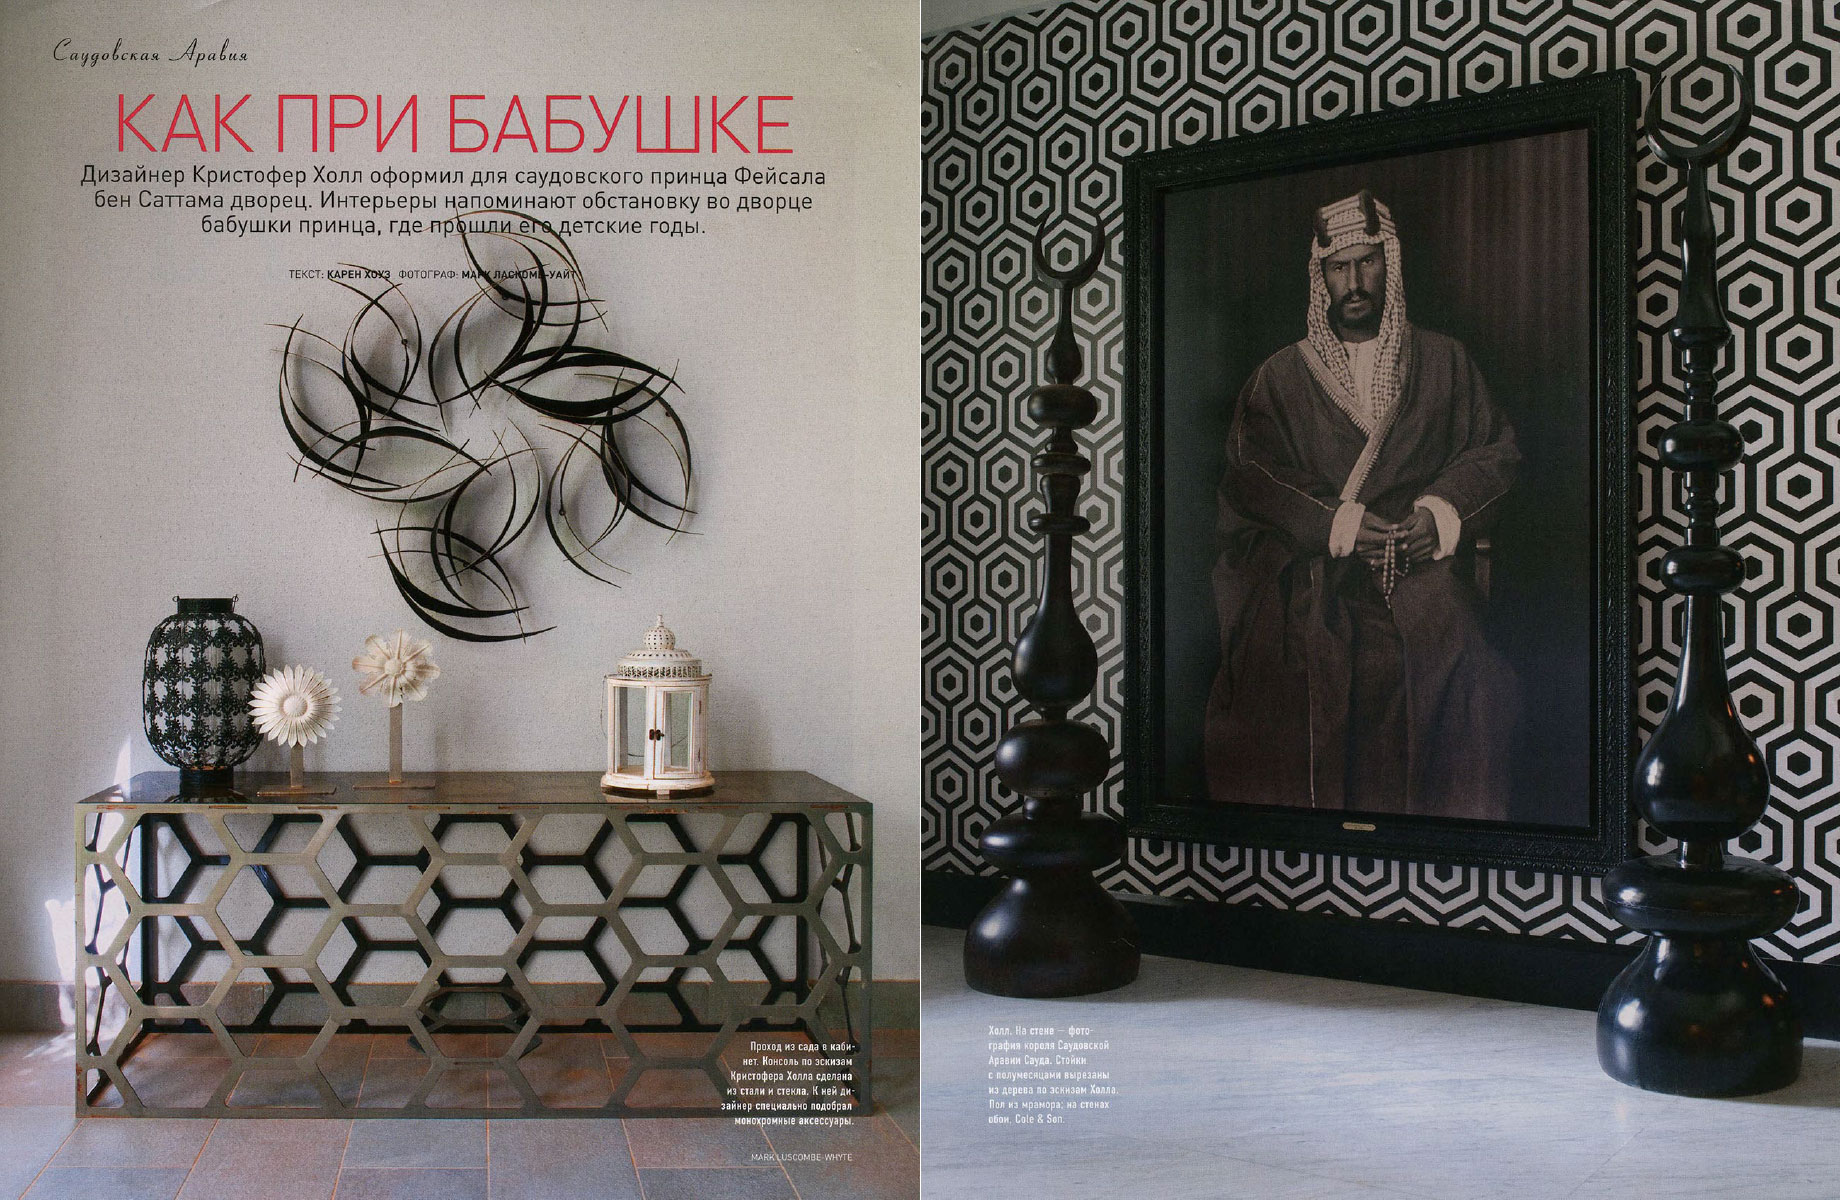 Christopher Hall, Architectural Digest, Russia.